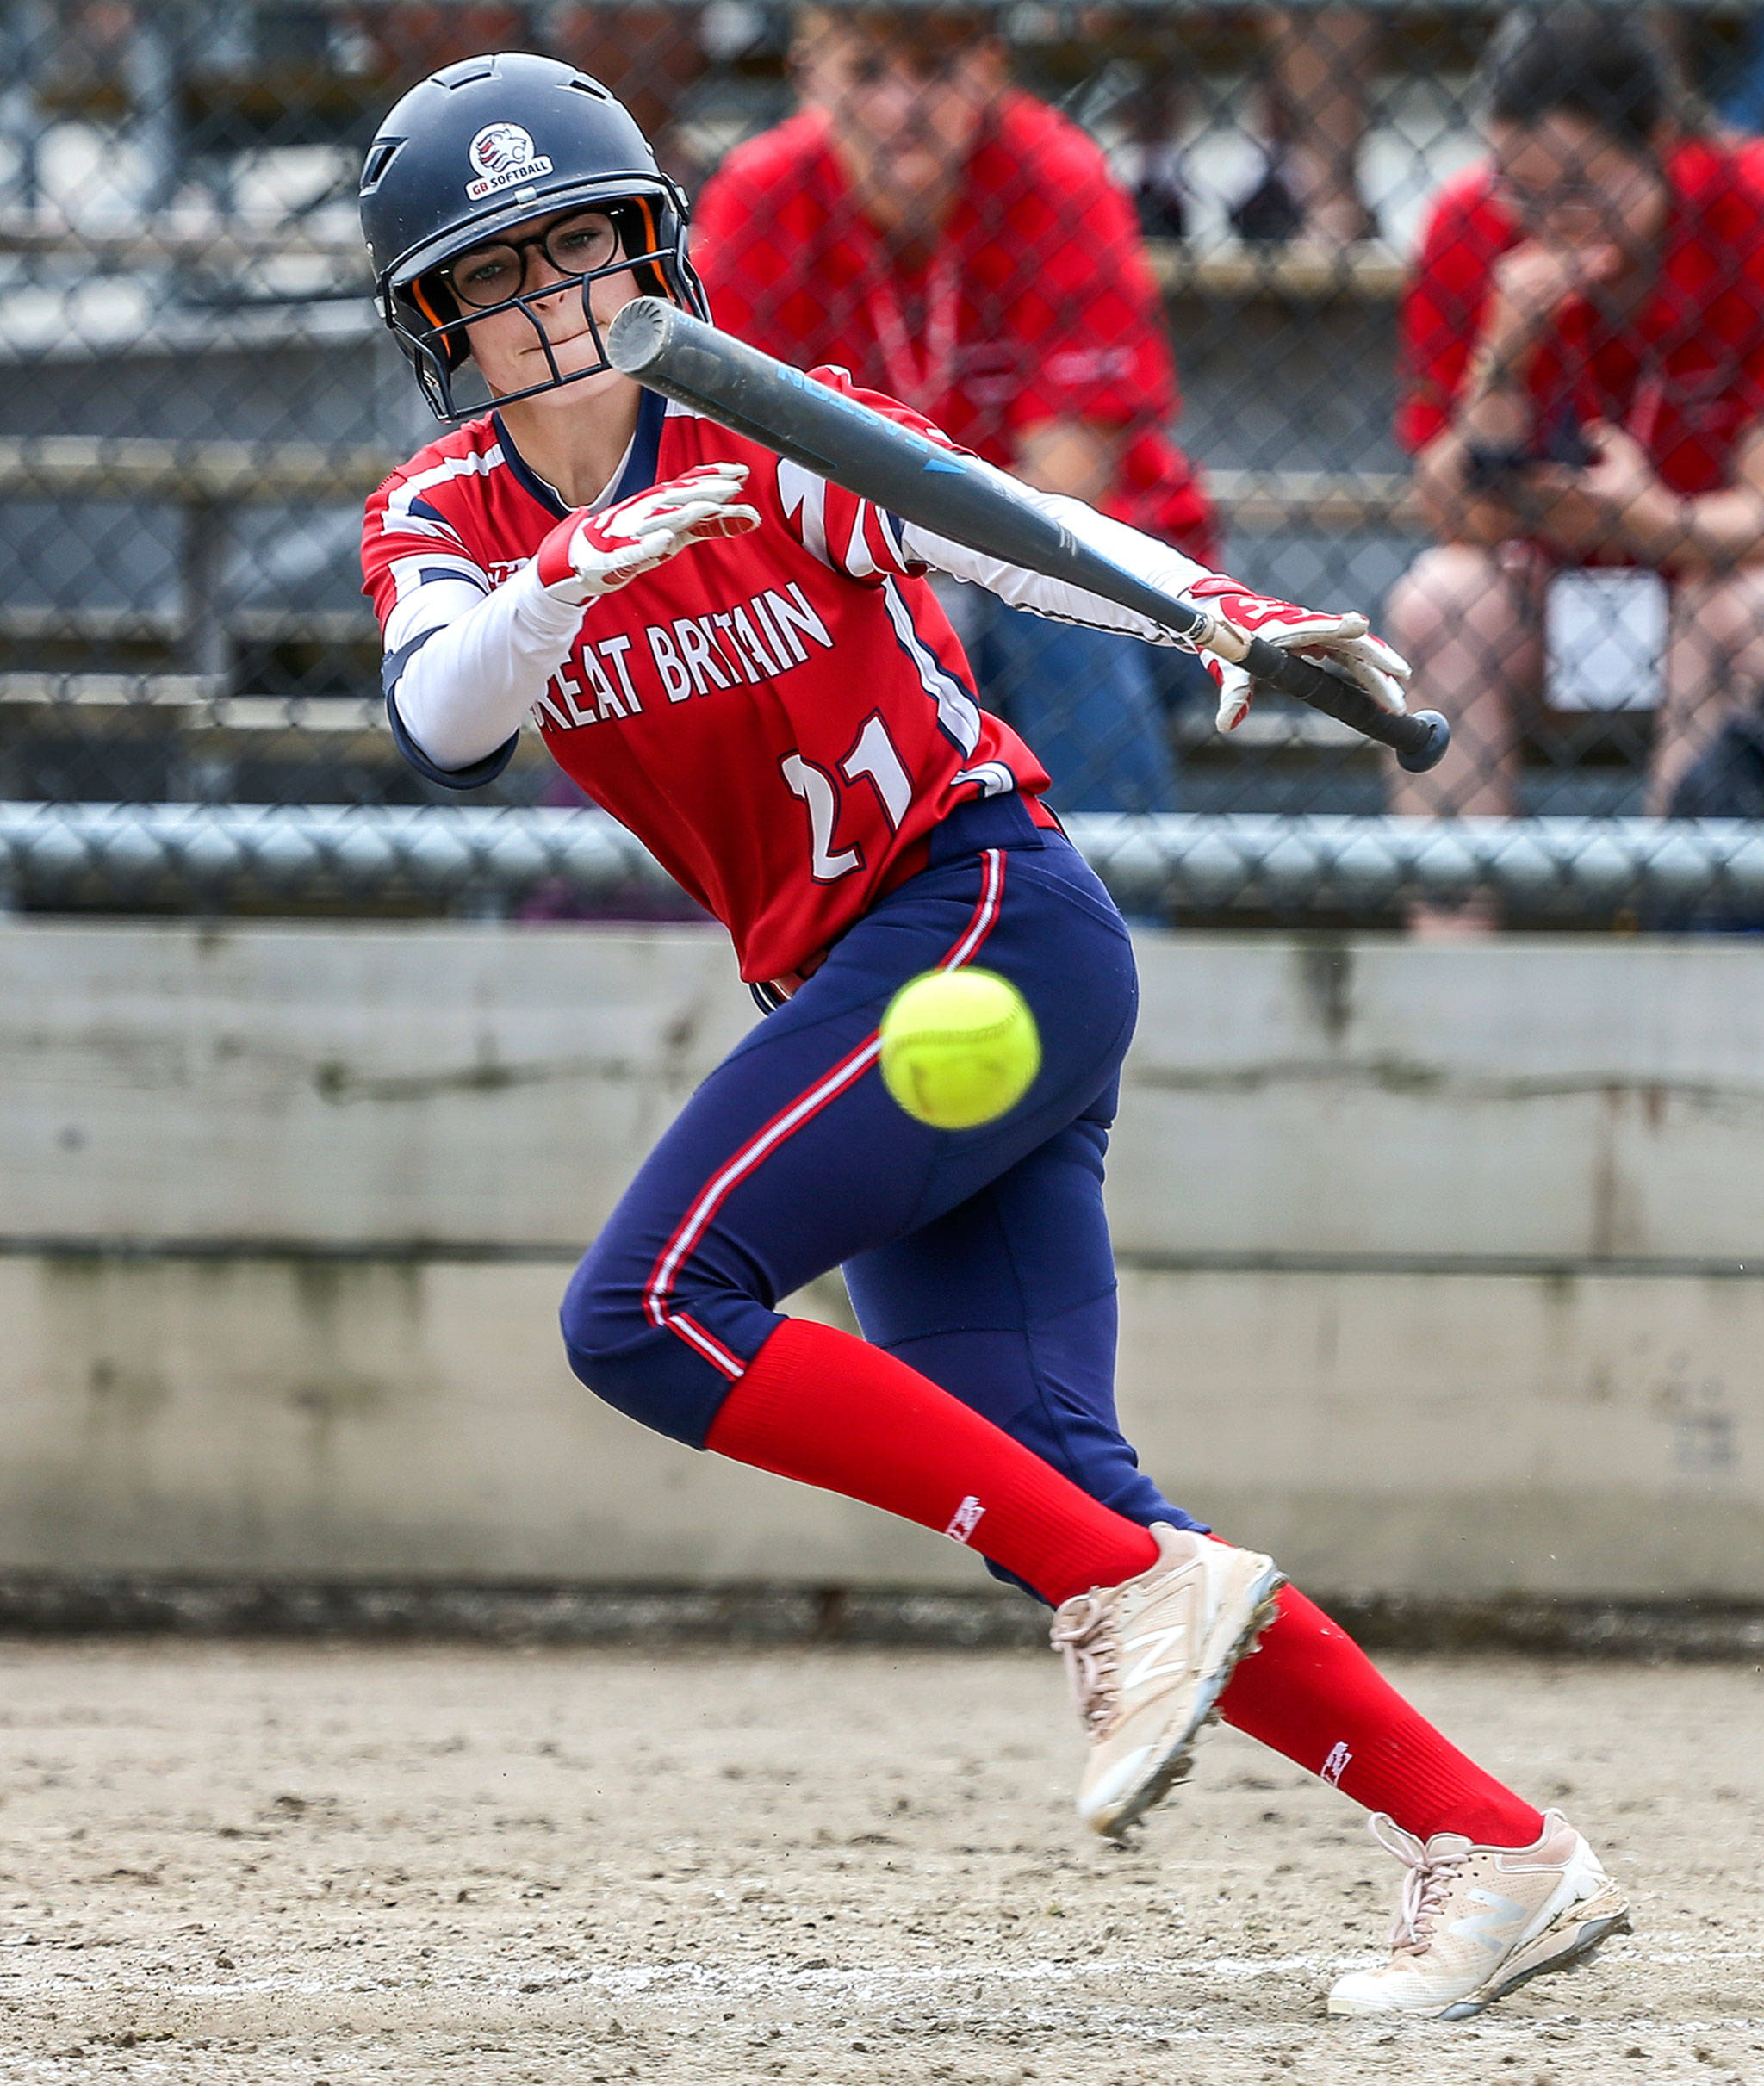 Aubrey Peterson hits during a game at the Canada Cup softball tournament on July 11 in Surrey, British Columbia. (Kevin Clark / The Herald)